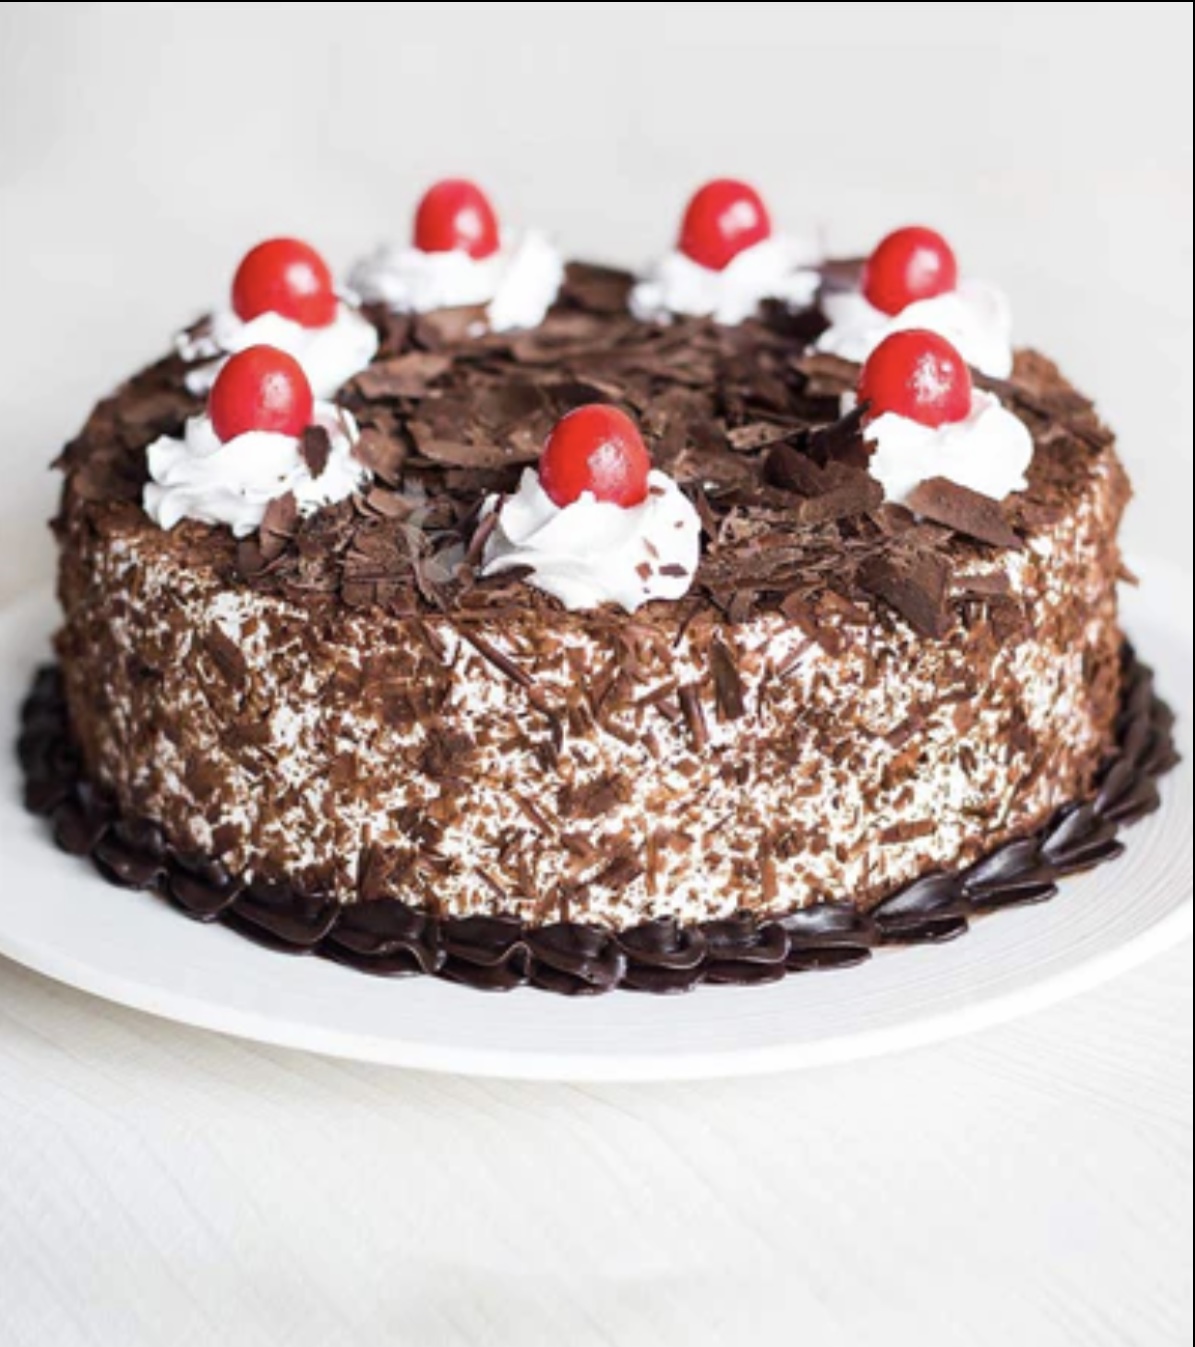 Black Forest Cake Per Pound in Nepal - Buy Cakes at Best Price at Thulo.Com